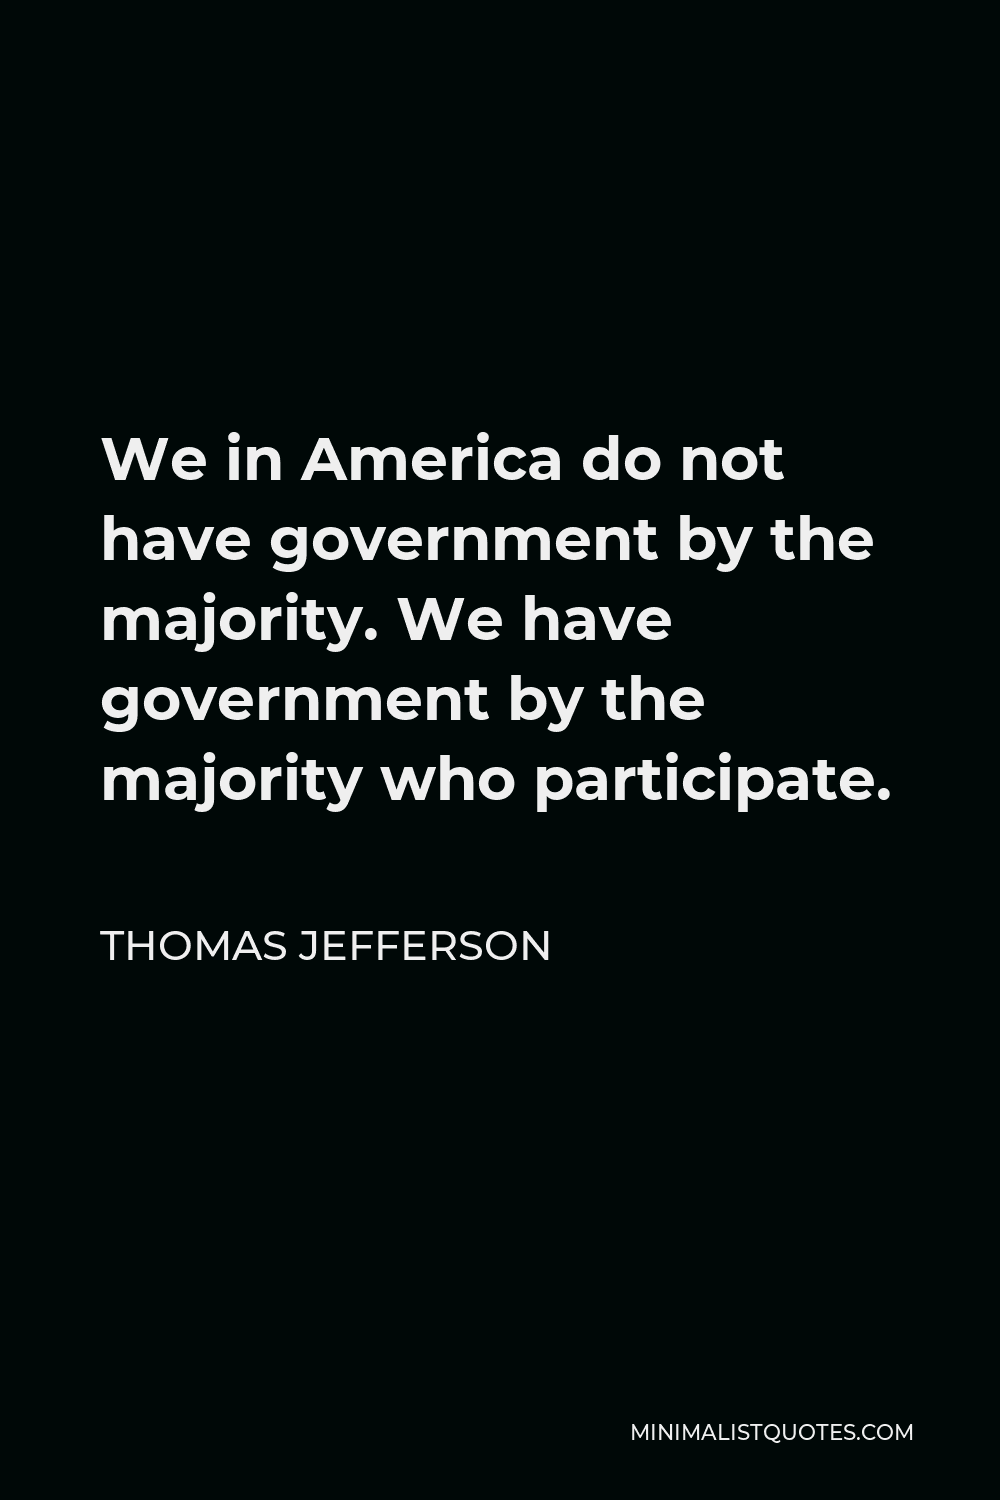 Thomas Jefferson Quote - We in America do not have government by the majority. We have government by the majority who participate.